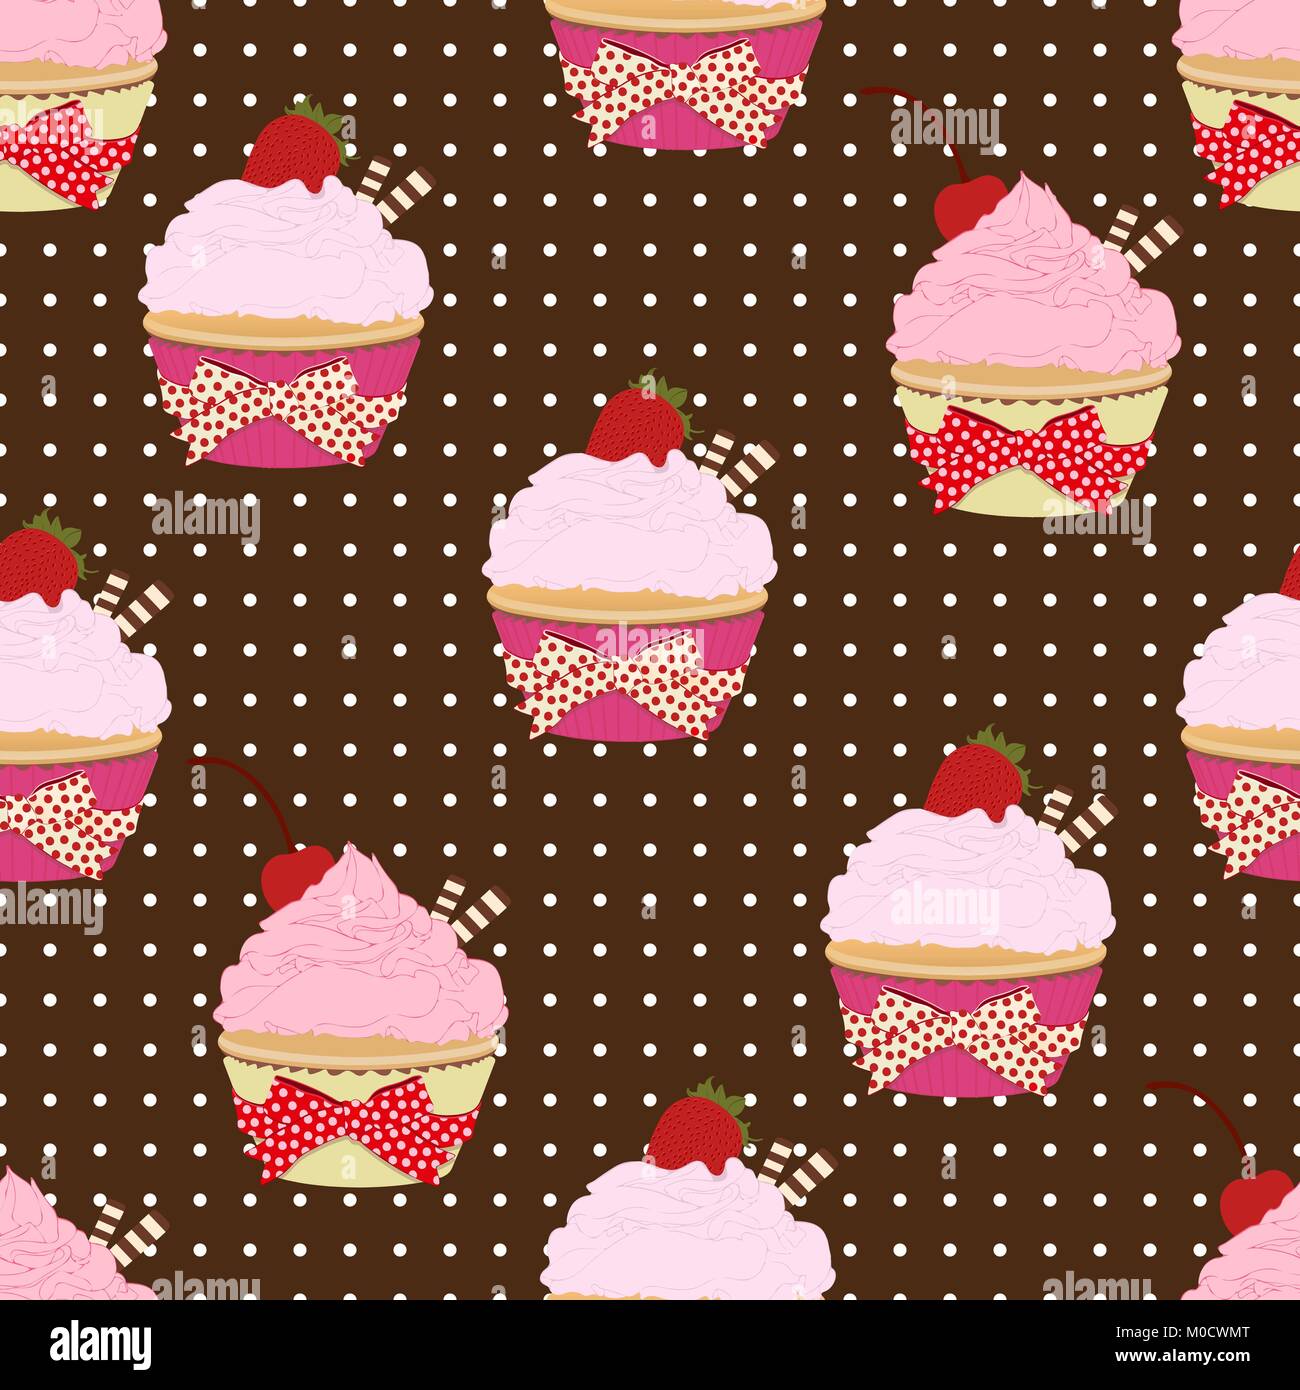 Cupcake seamless pattern, vector background. Cakes with pink fruit cream, with a cherry on top and waffles on a brown backdrop with polka dots. Painte Stock Vector